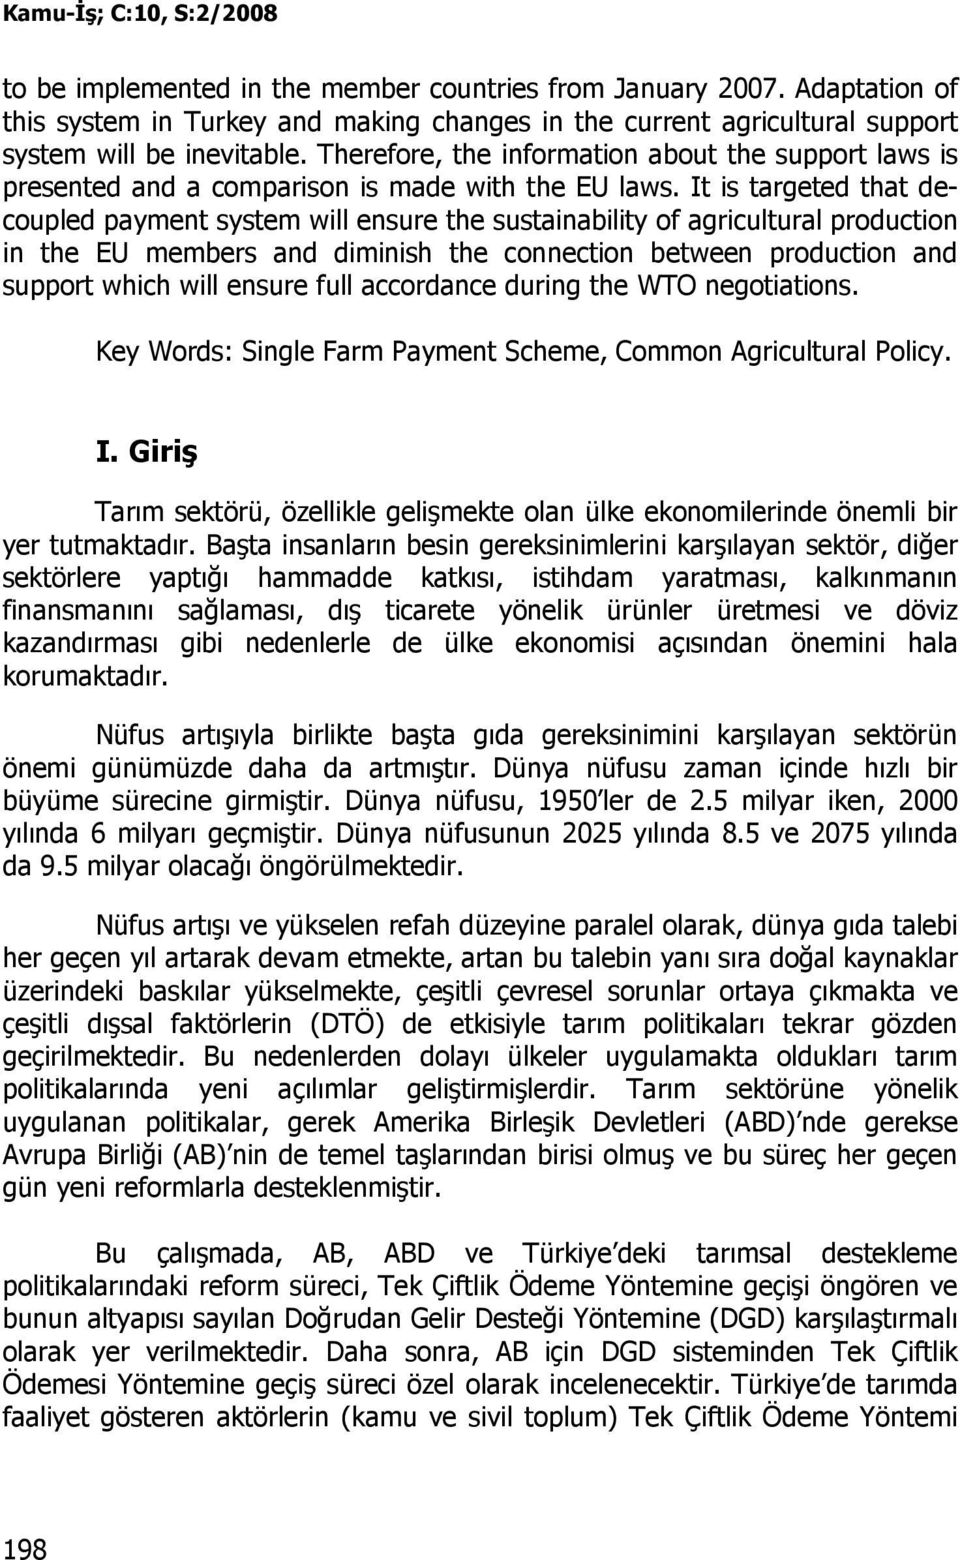 It is targeted that decoupled payment system will ensure the sustainability of agricultural production in the EU members and diminish the connection between production and support which will ensure